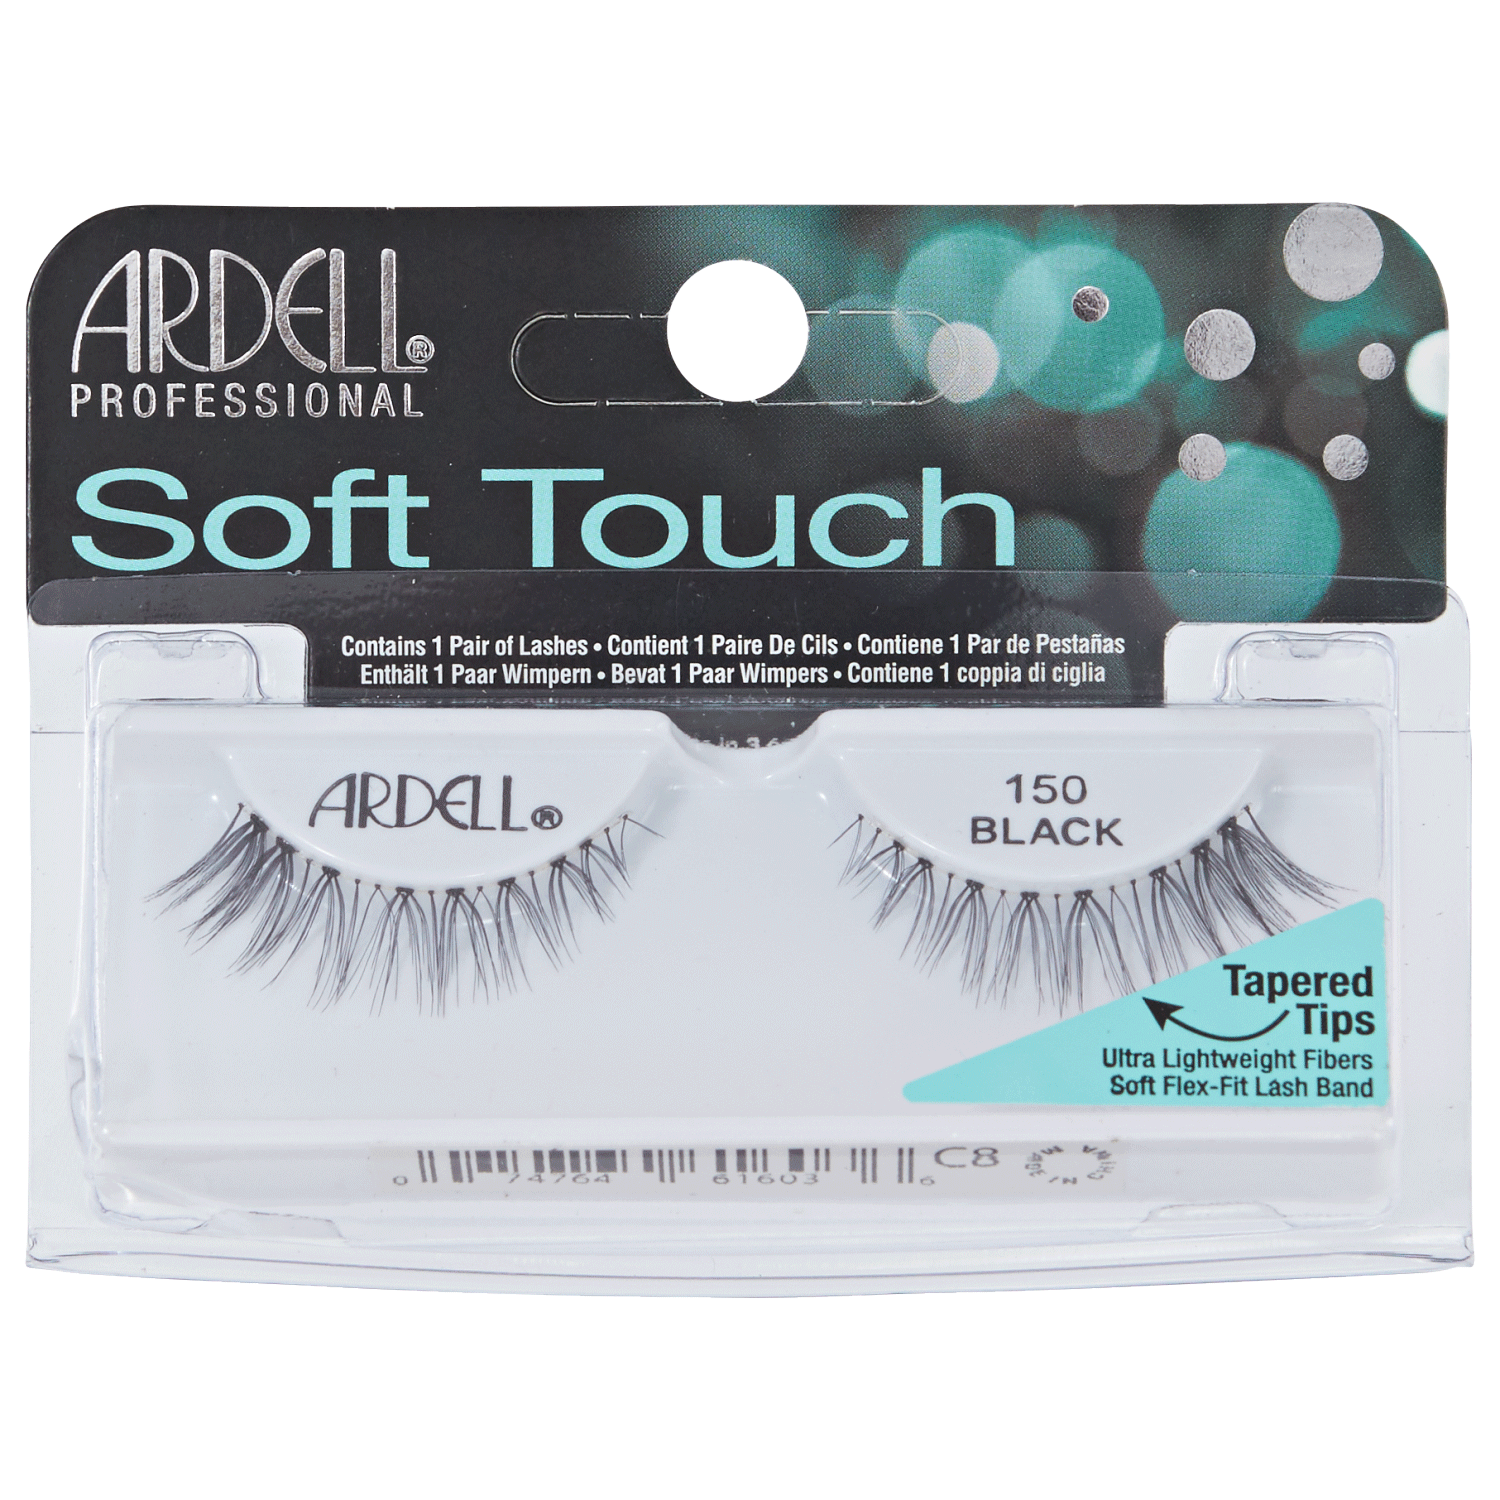 Soft Touch #150 Lashes